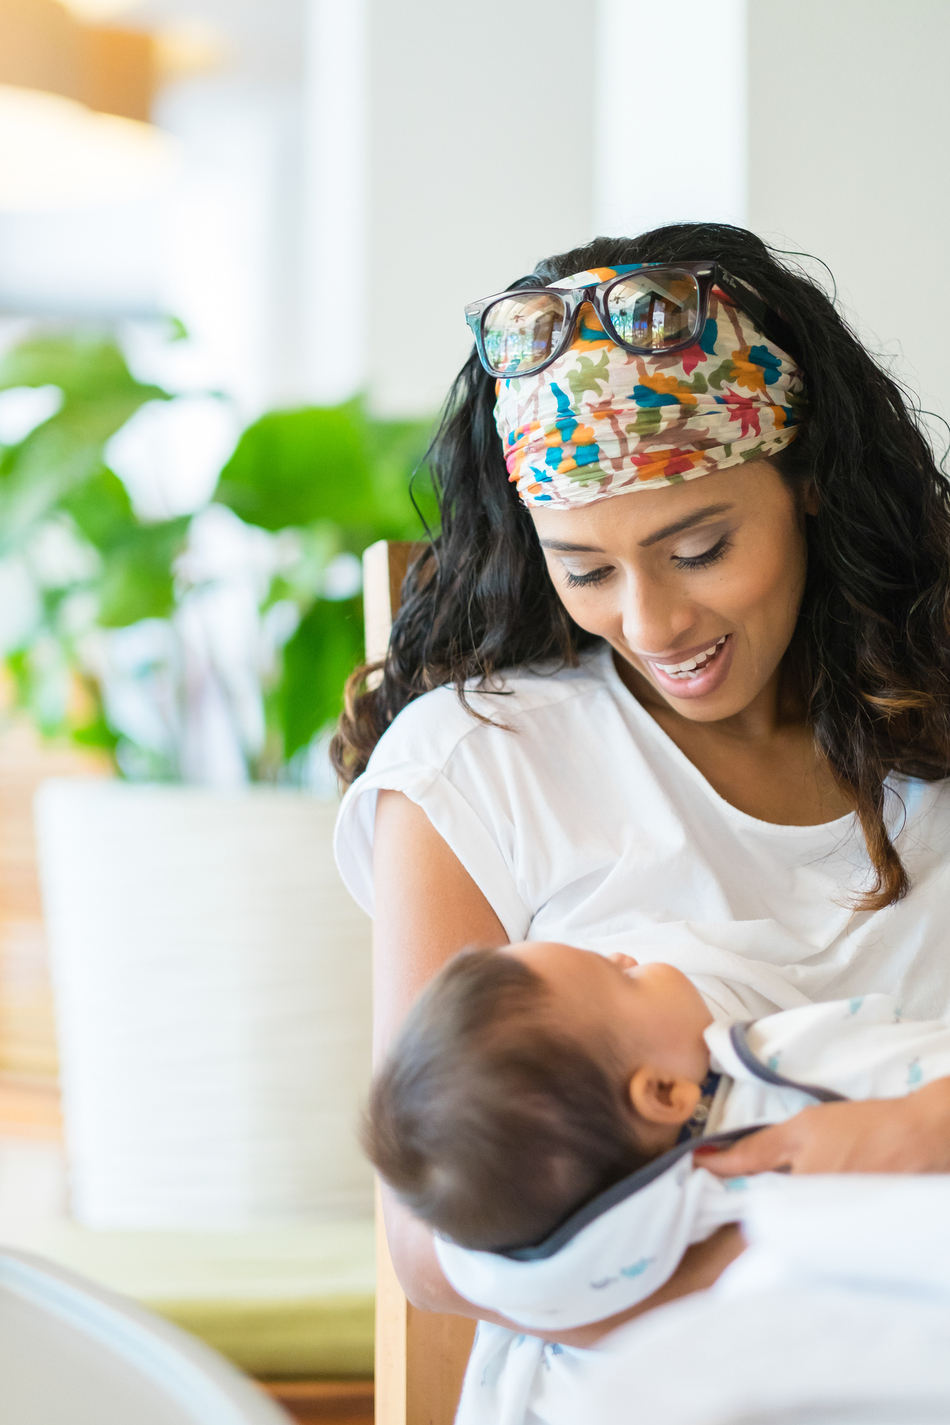 Concerns About Breastfeeding? Lactation Specialist Can Help